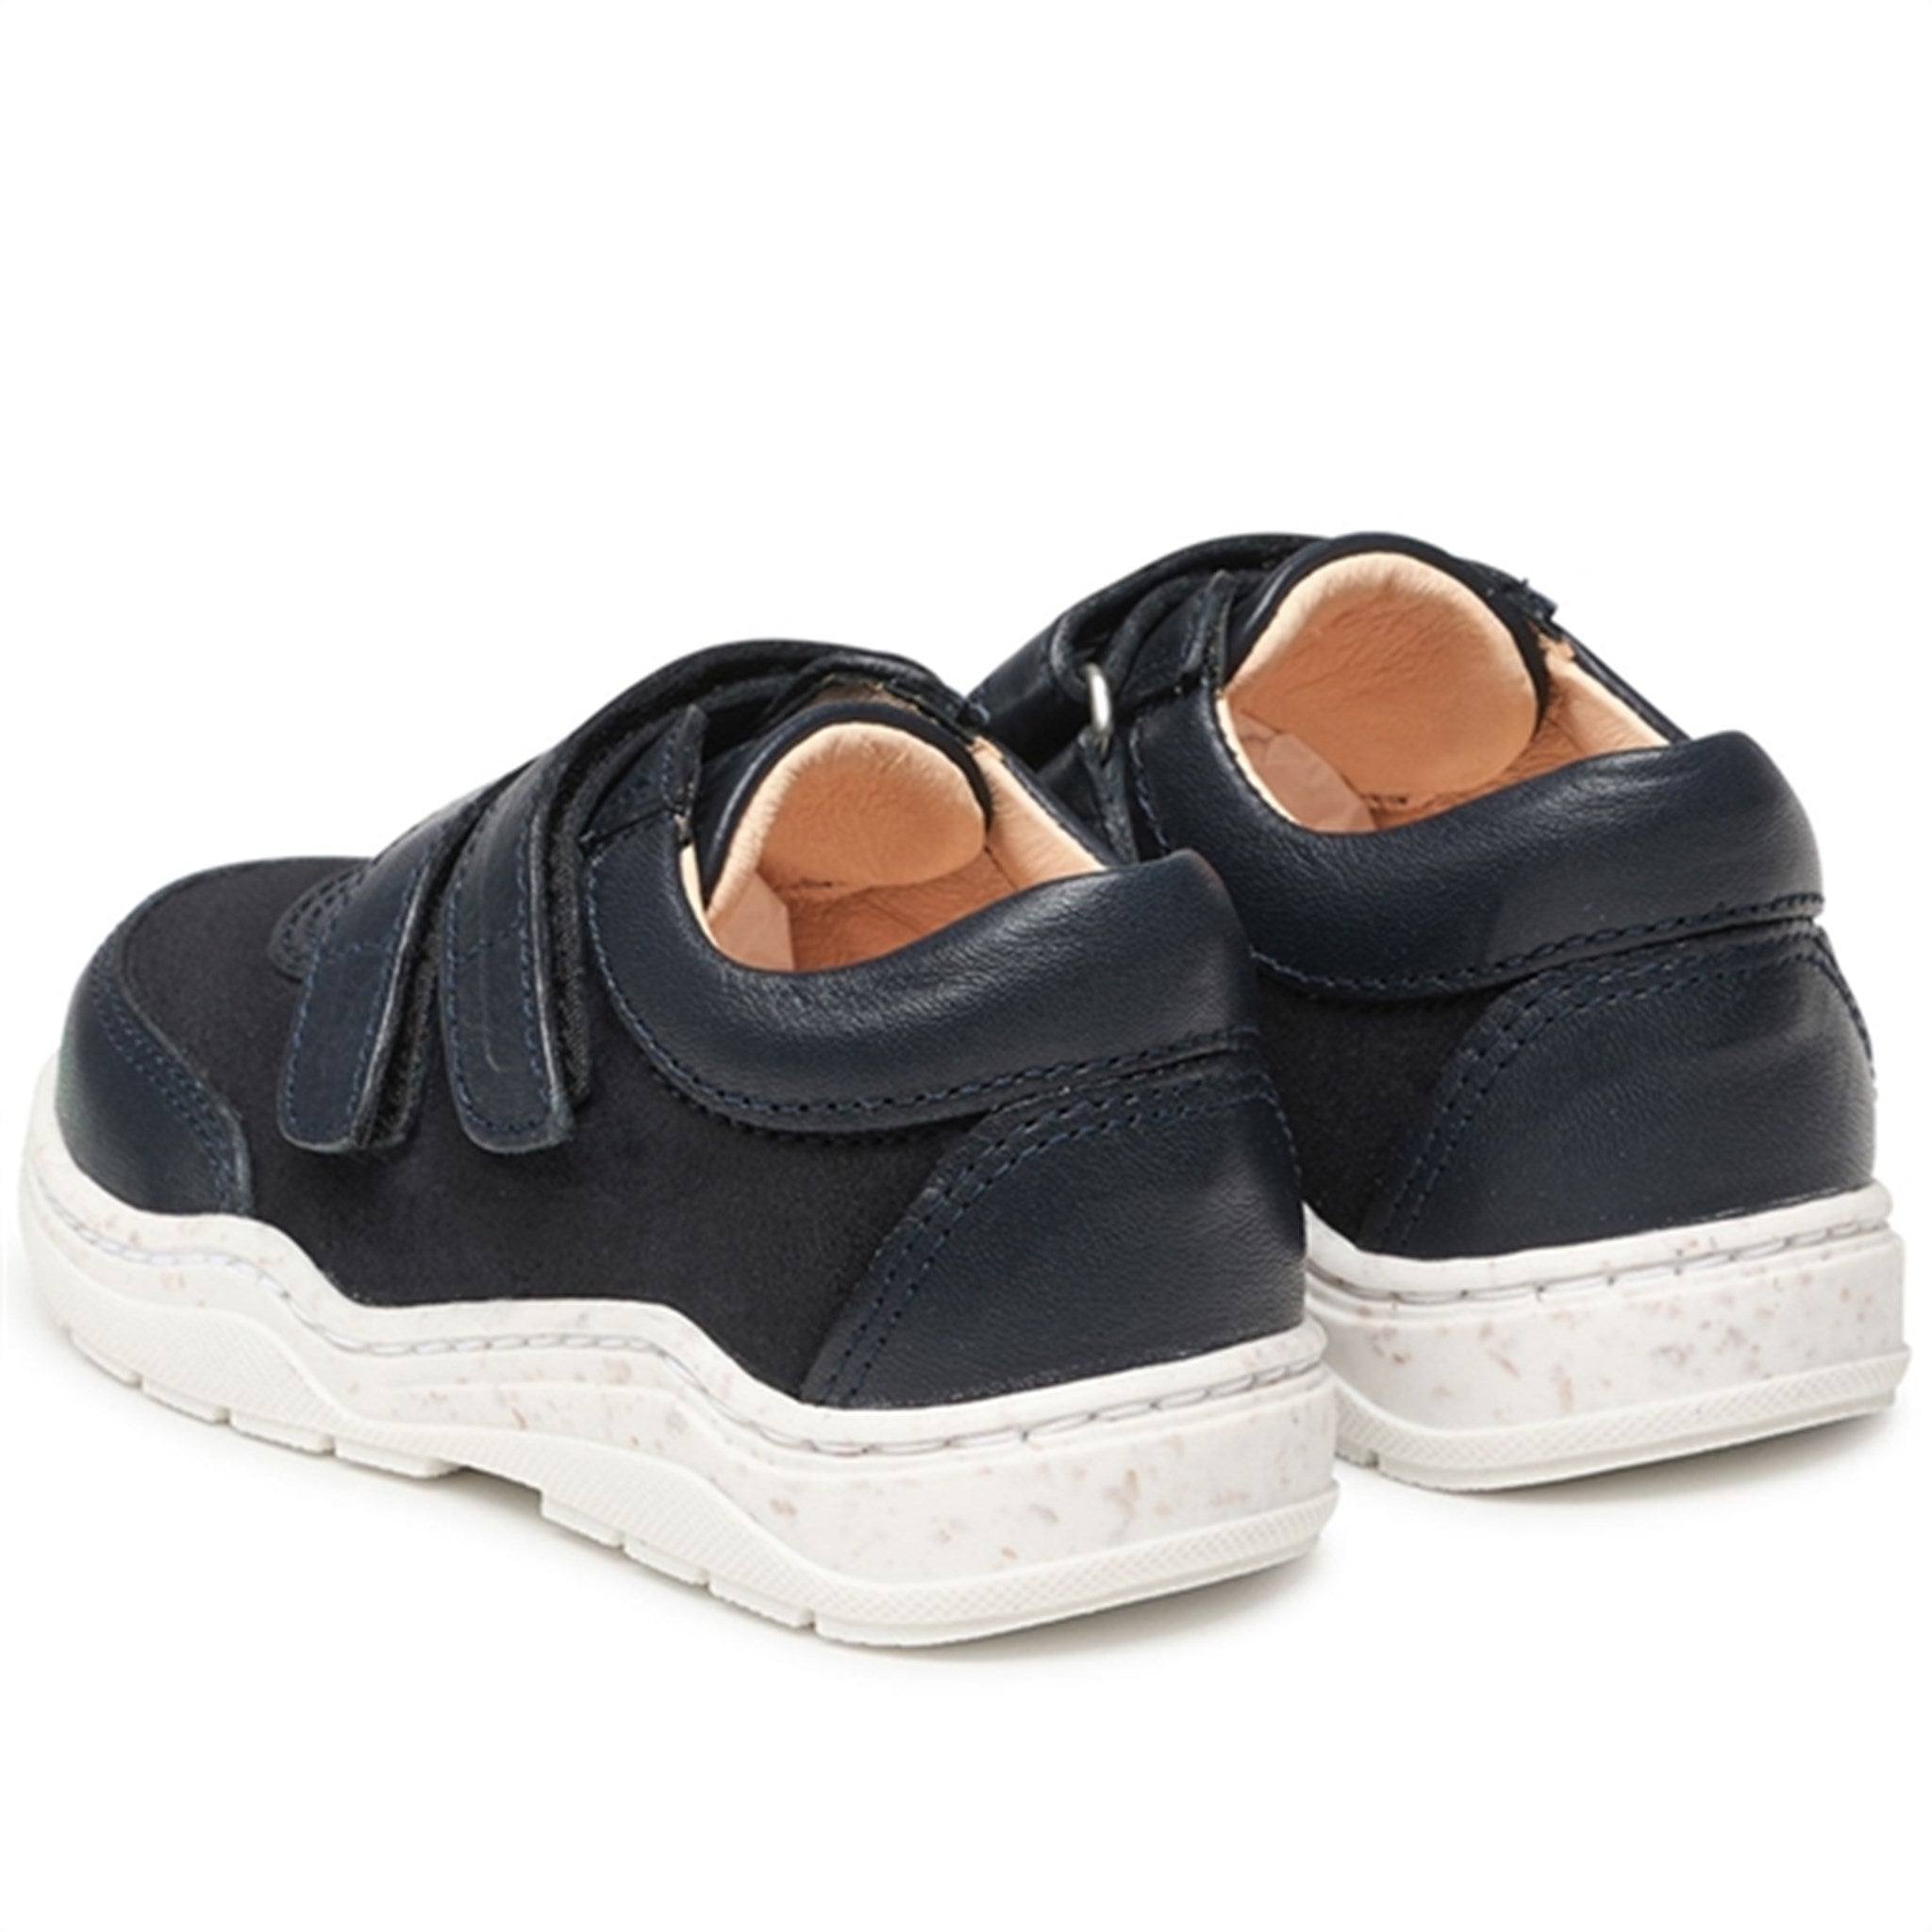 Angulus Begynder Sneakers m. Velcro Navy/ Navy 3364-101-7547 1546/2215 2